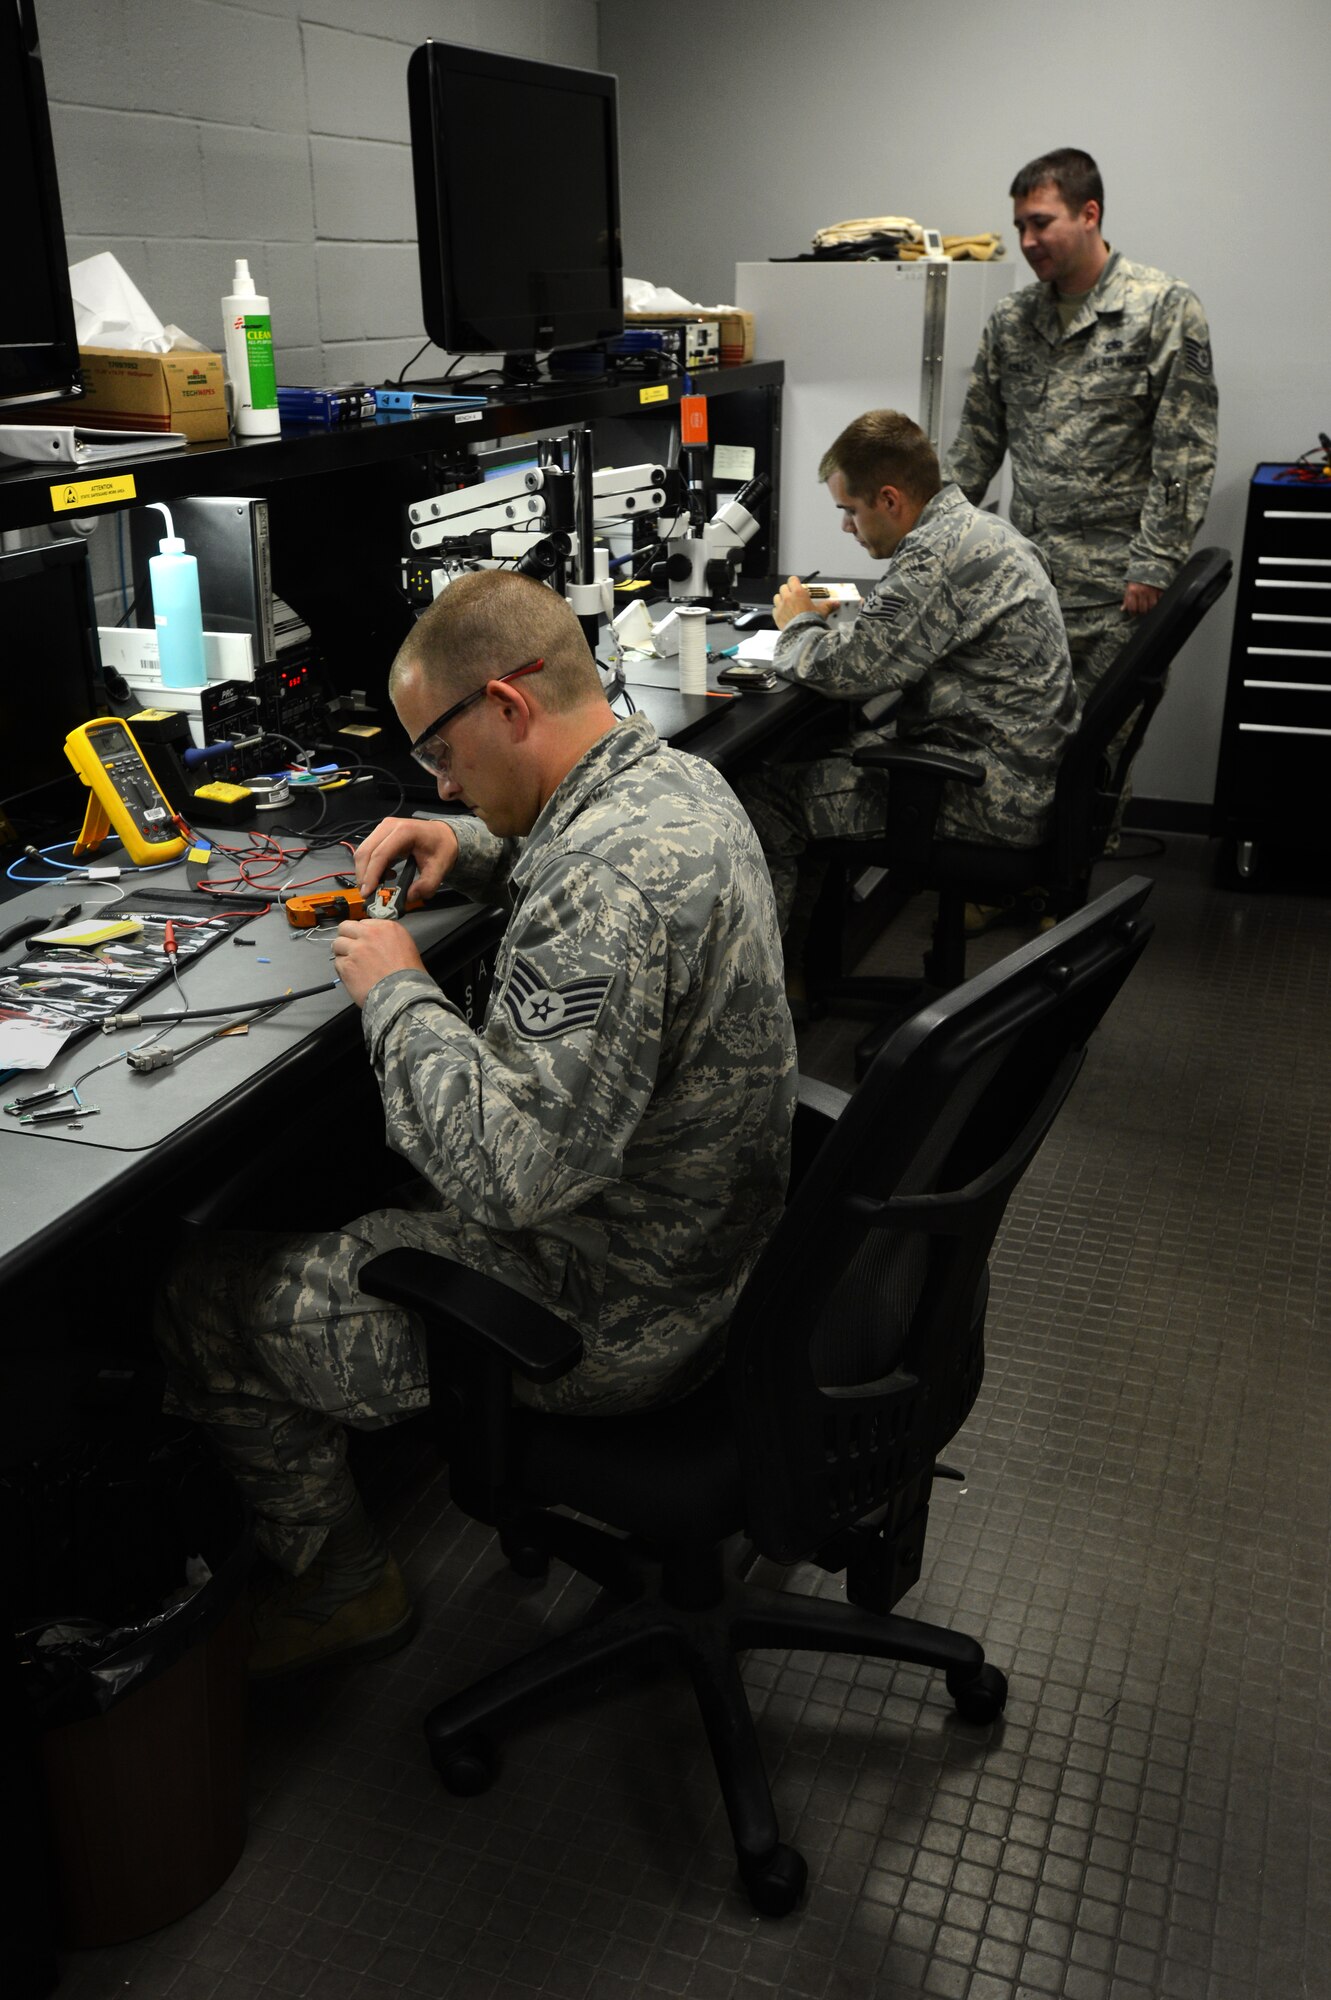 [From left] U.S. Air Force Staff Sgt. Scott Williams, Tech Sgt. Michael Kelly and Staff Sgt. Laverne Borst, 20th Maintenance Group Air Force Repair Enhancement Program technicians, determine the cause of several broken parts from around the 20th Fighter Wing at Shaw Air Force Base, S.C., May 21, 2014.  The three technician’s goal is to save the 20th FW at least $100,000 each month by fixing broken parts instead of buying new ones. (U.S. Air Force photo by Airman 1st Class Jensen Stidham/Released)